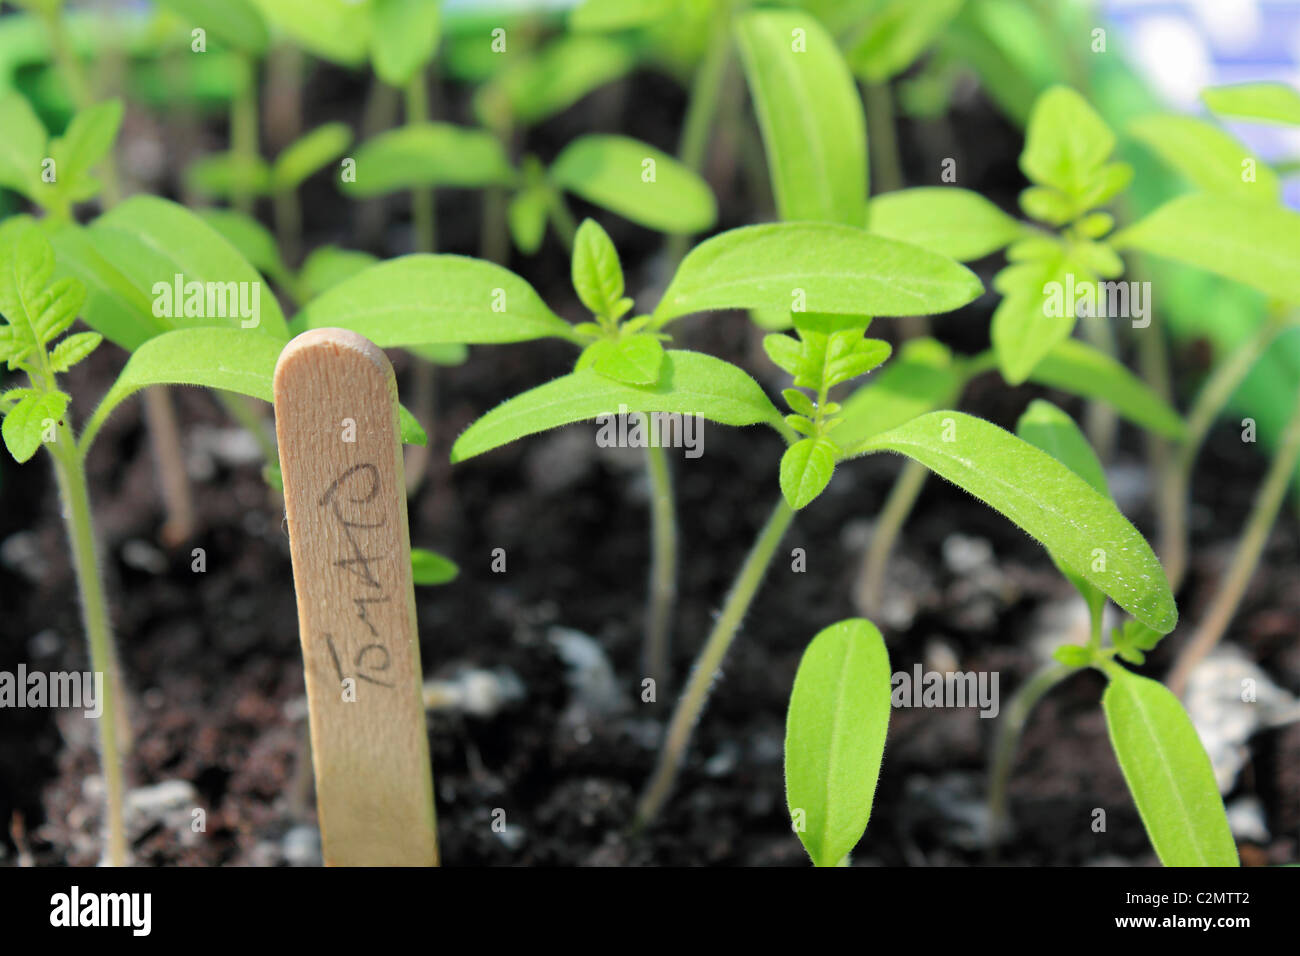 Tomato plant gardeners delight seedlings in tray with label. Surrey England UK. Stock Photo